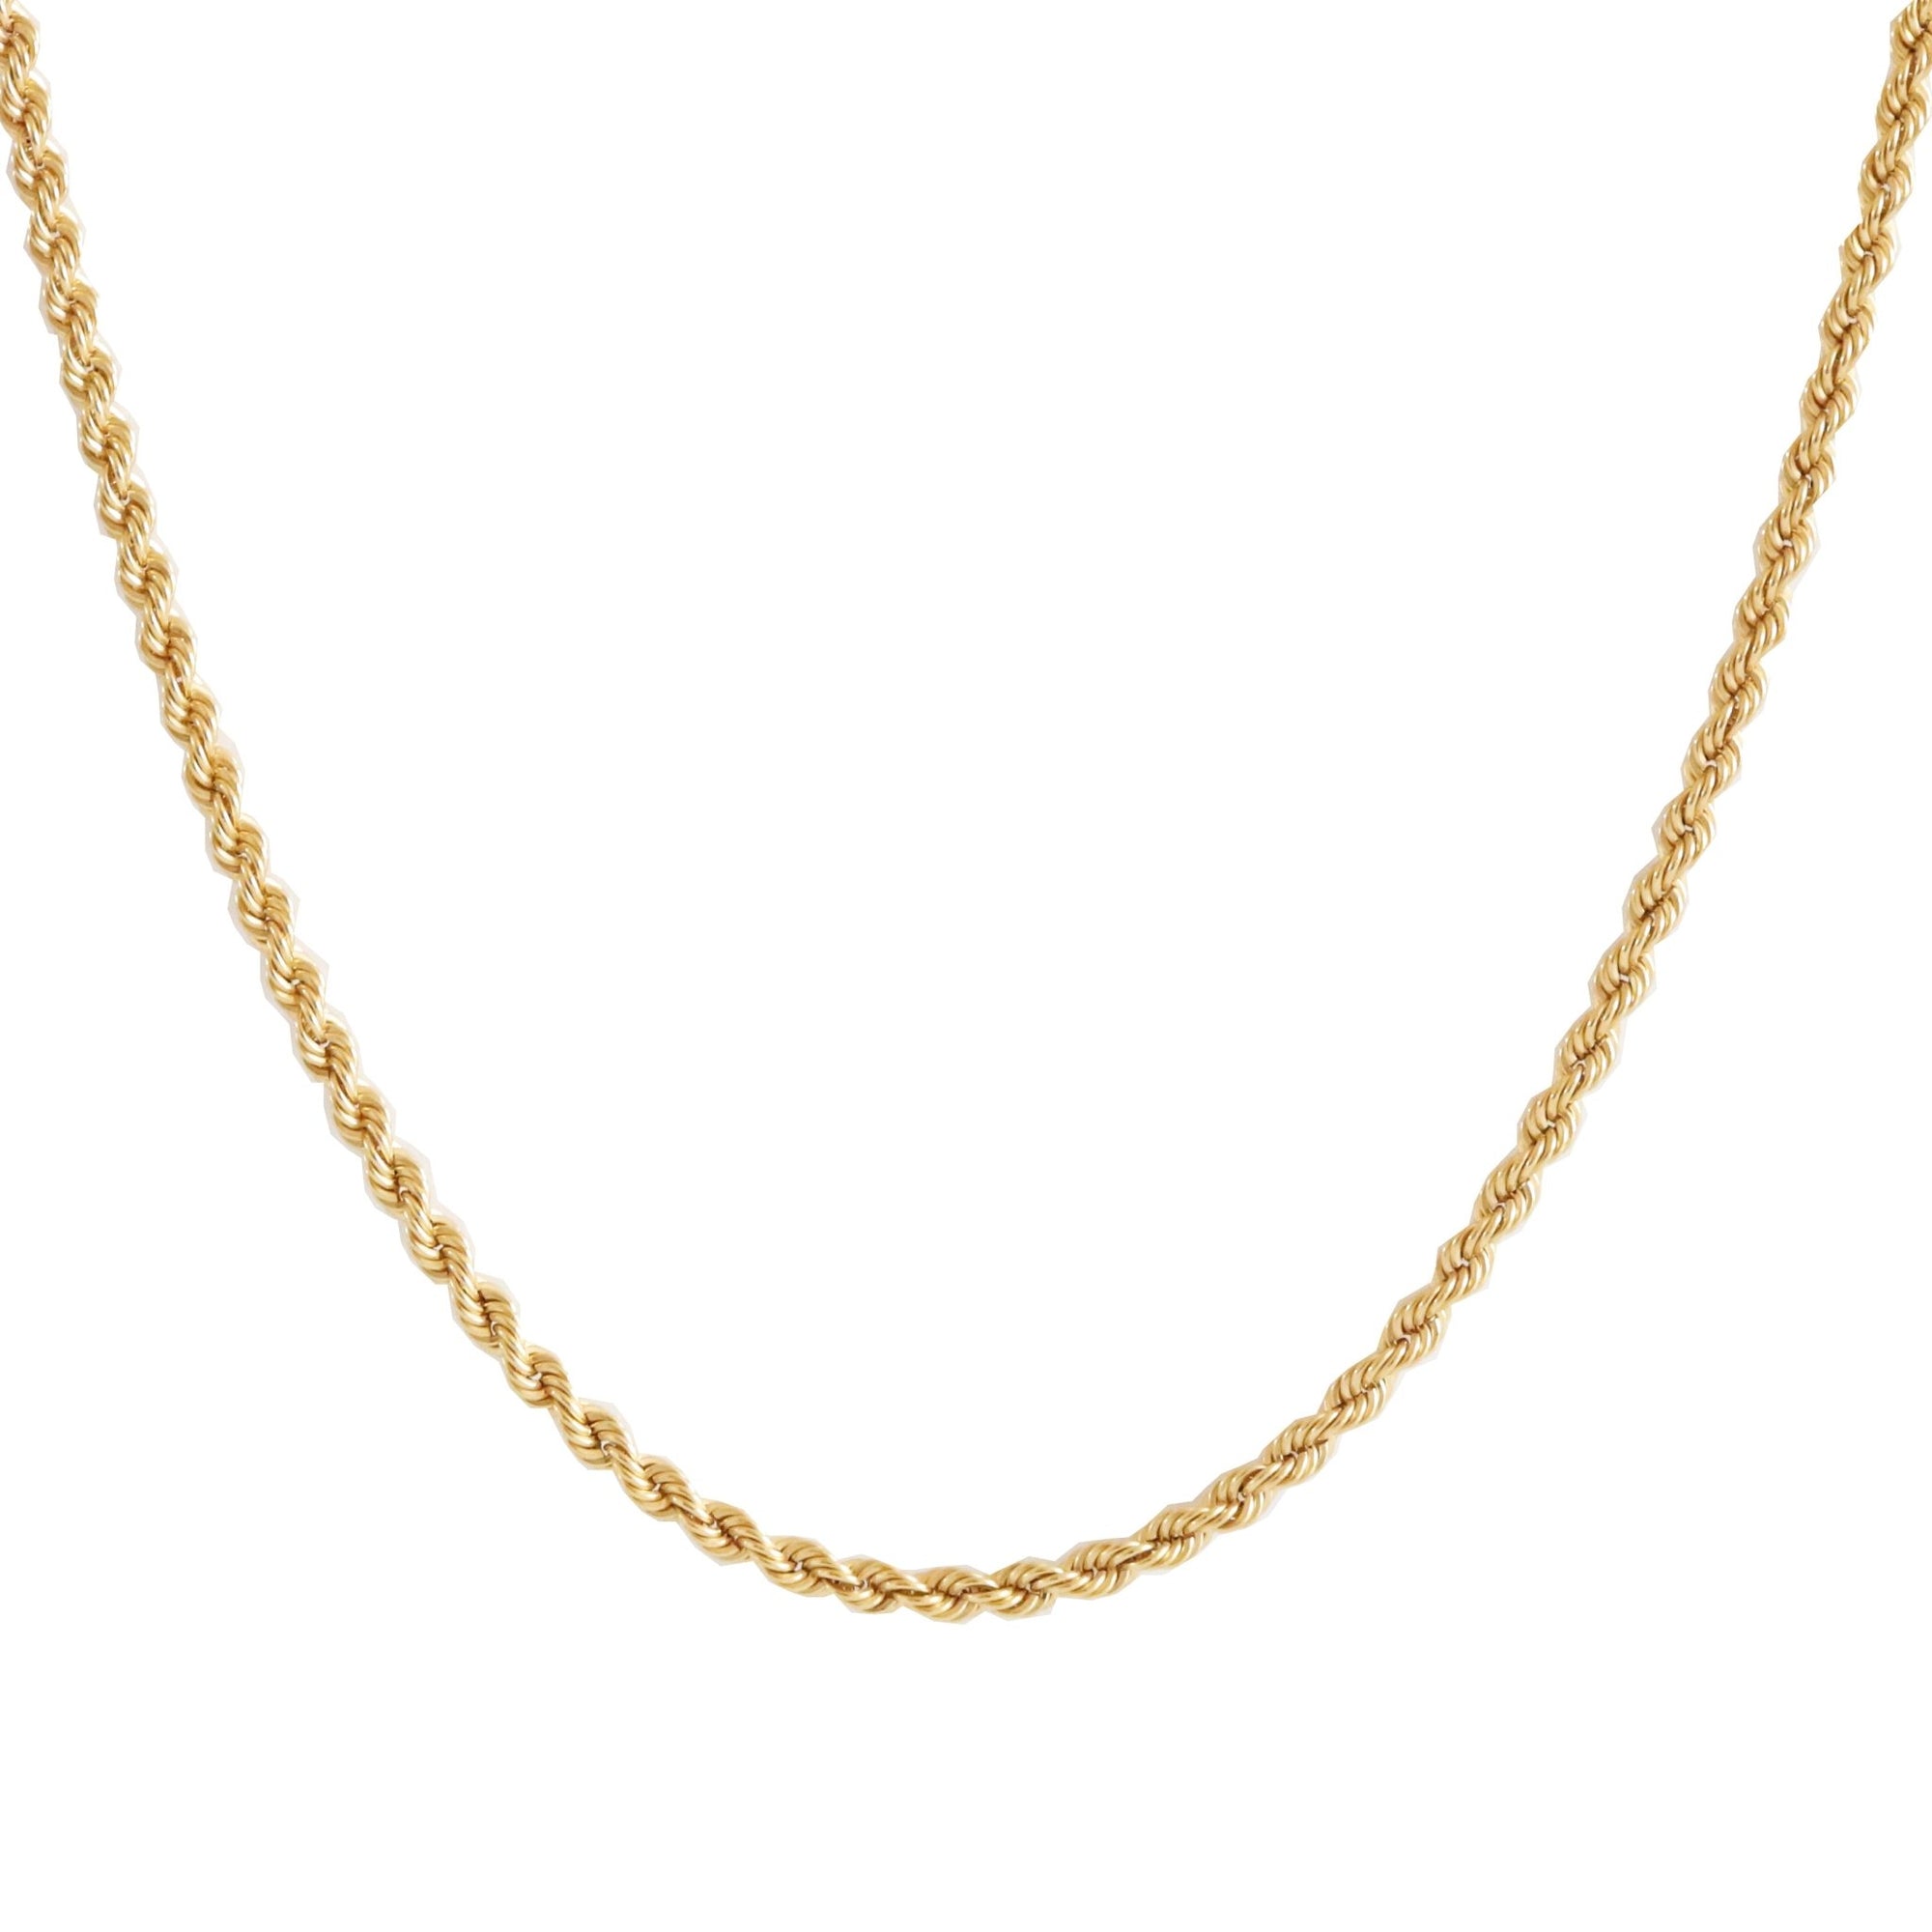 POISE TWISTED ROPE CHAIN 15-17" NECKLACE GOLD - SO PRETTY CARA COTTER